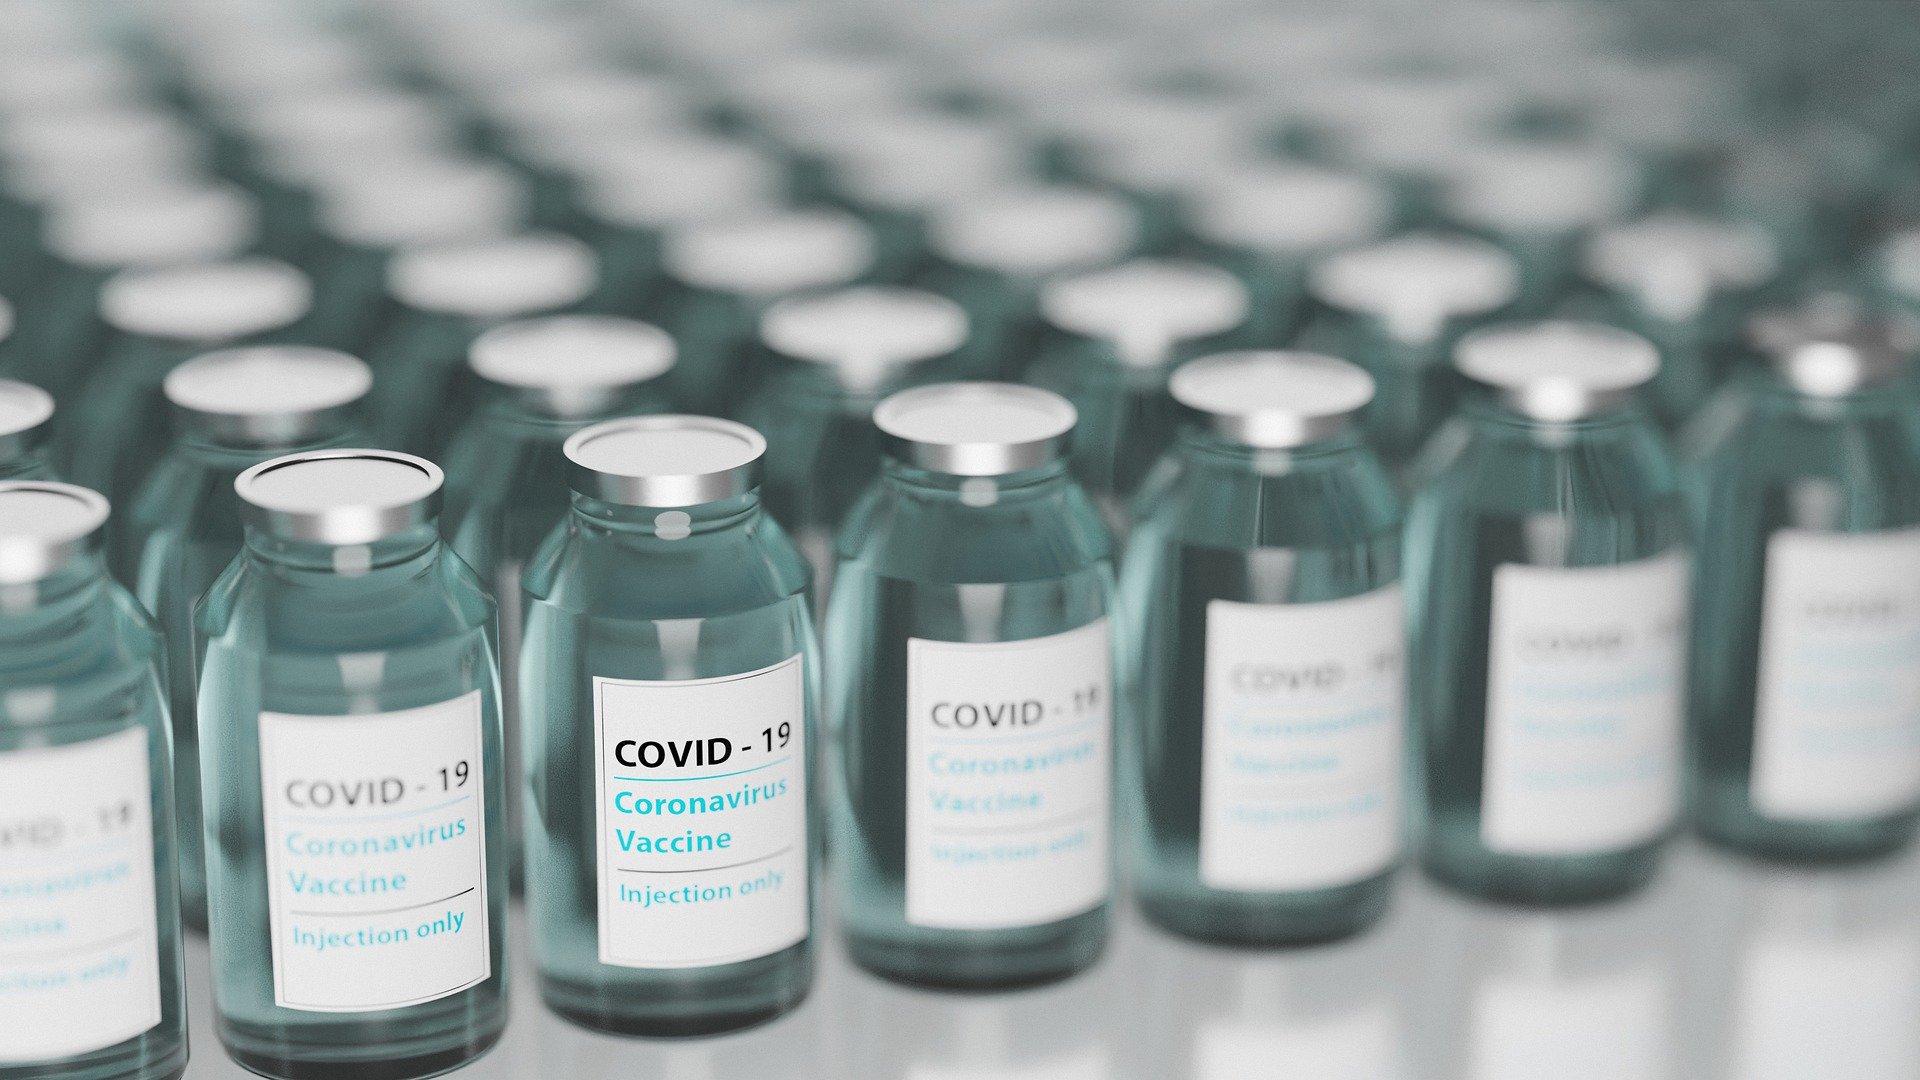 20,000 Doses of COVID-19 Vaccine Sent to Gaza from UAE